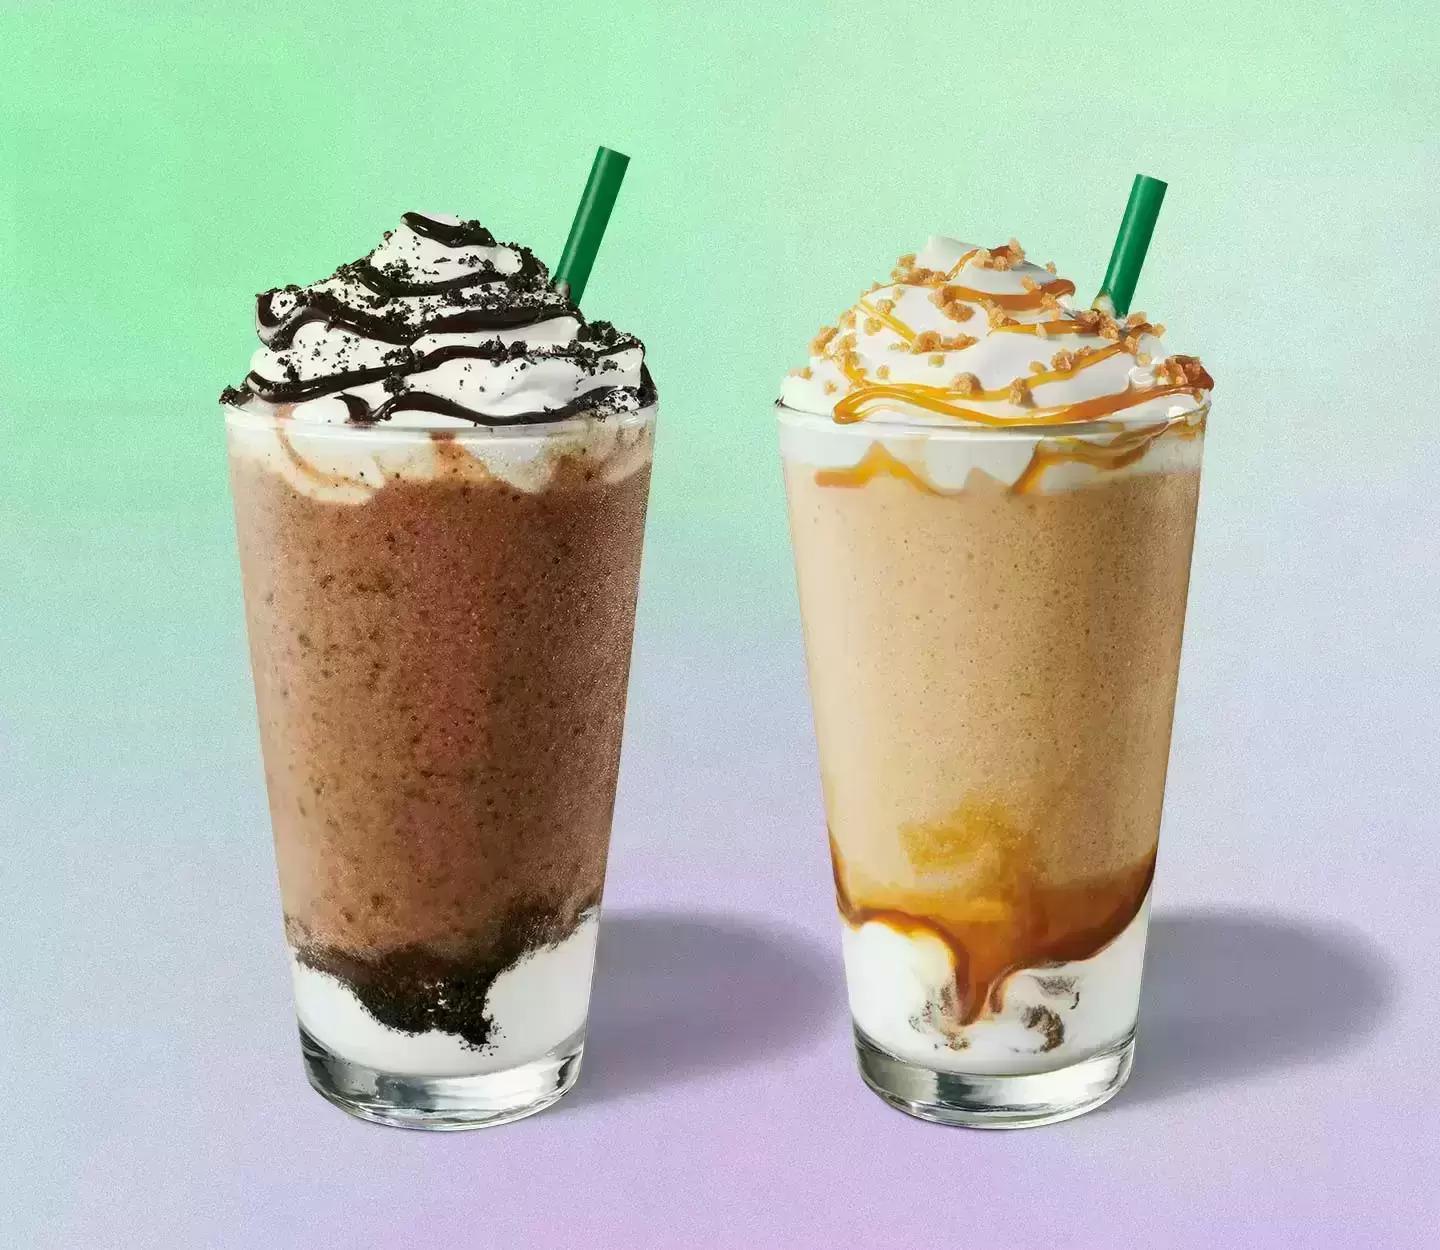 Starbucks Handcrafted Cold Beverage for 50% Off